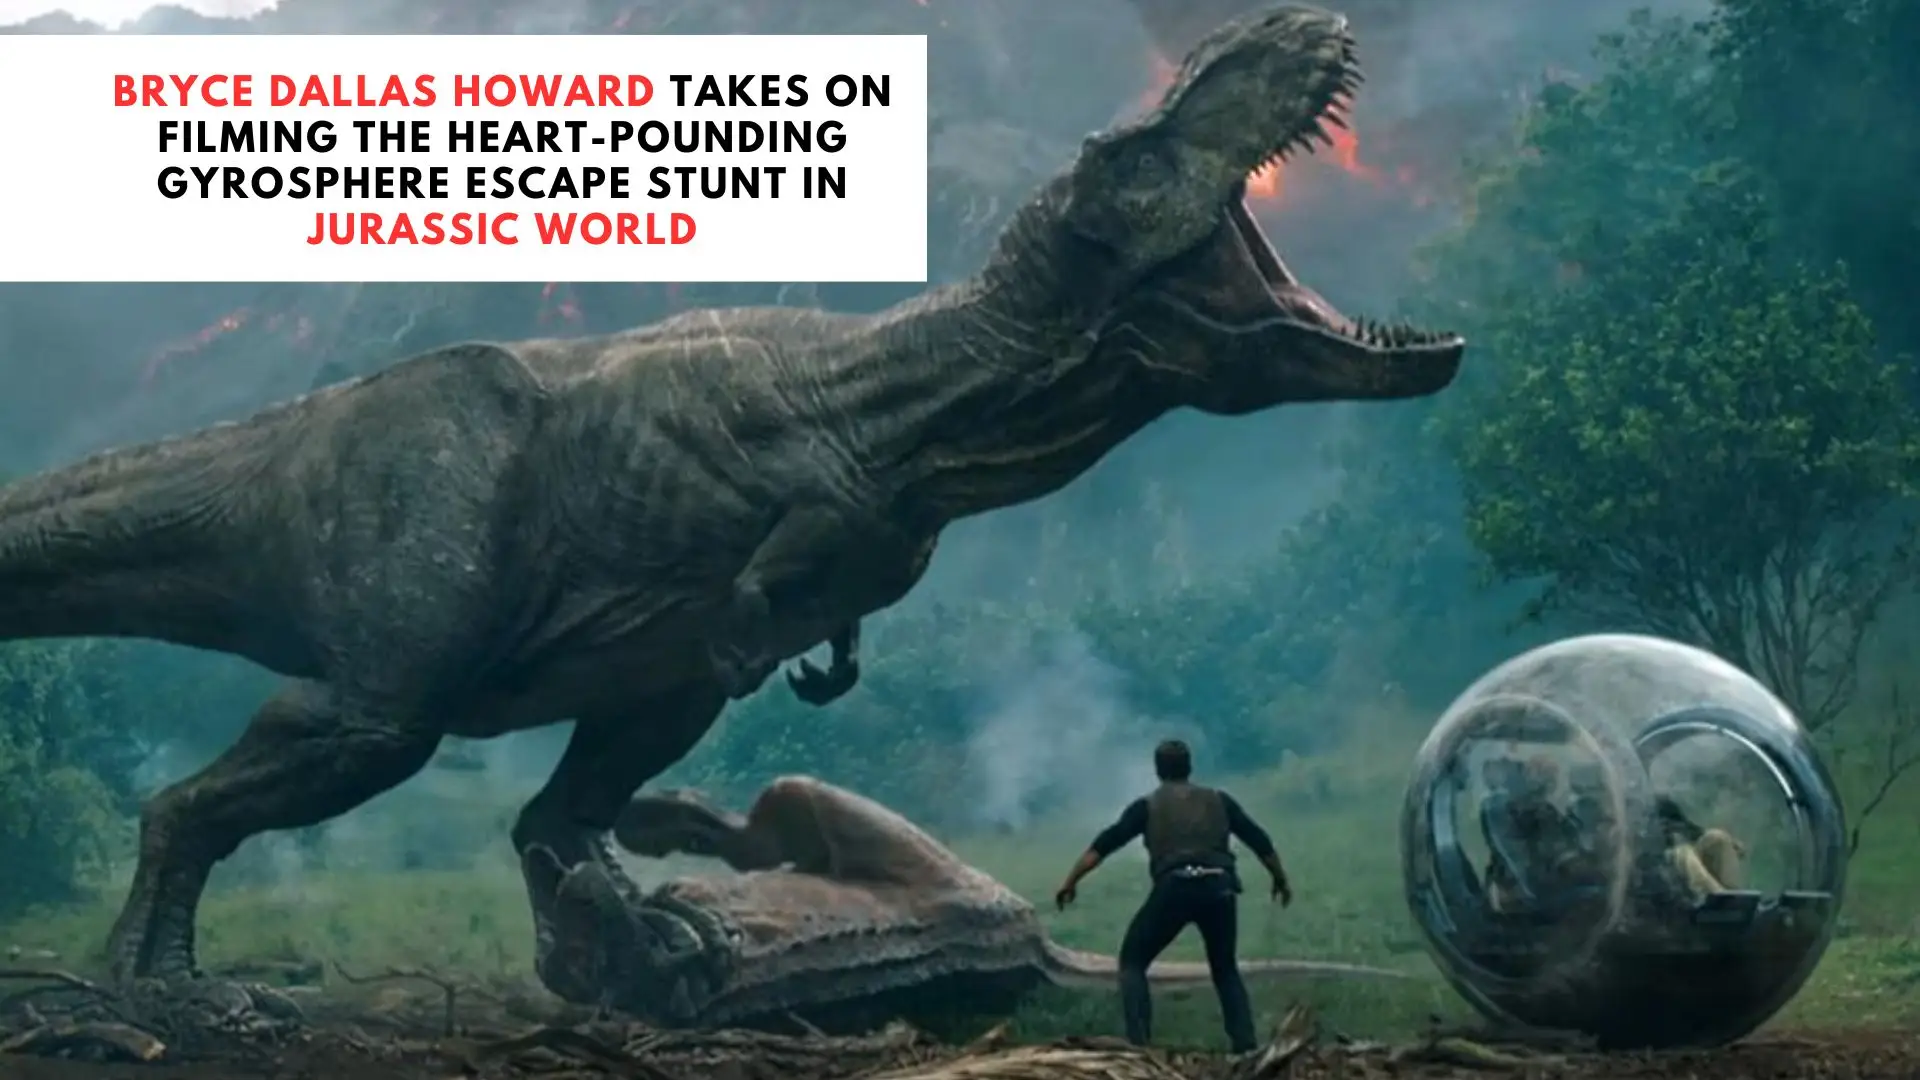 Bryce Dallas Howard Takes on Filming the Heart-Pounding Gyrosphere Escape Stunt in Jurassic World